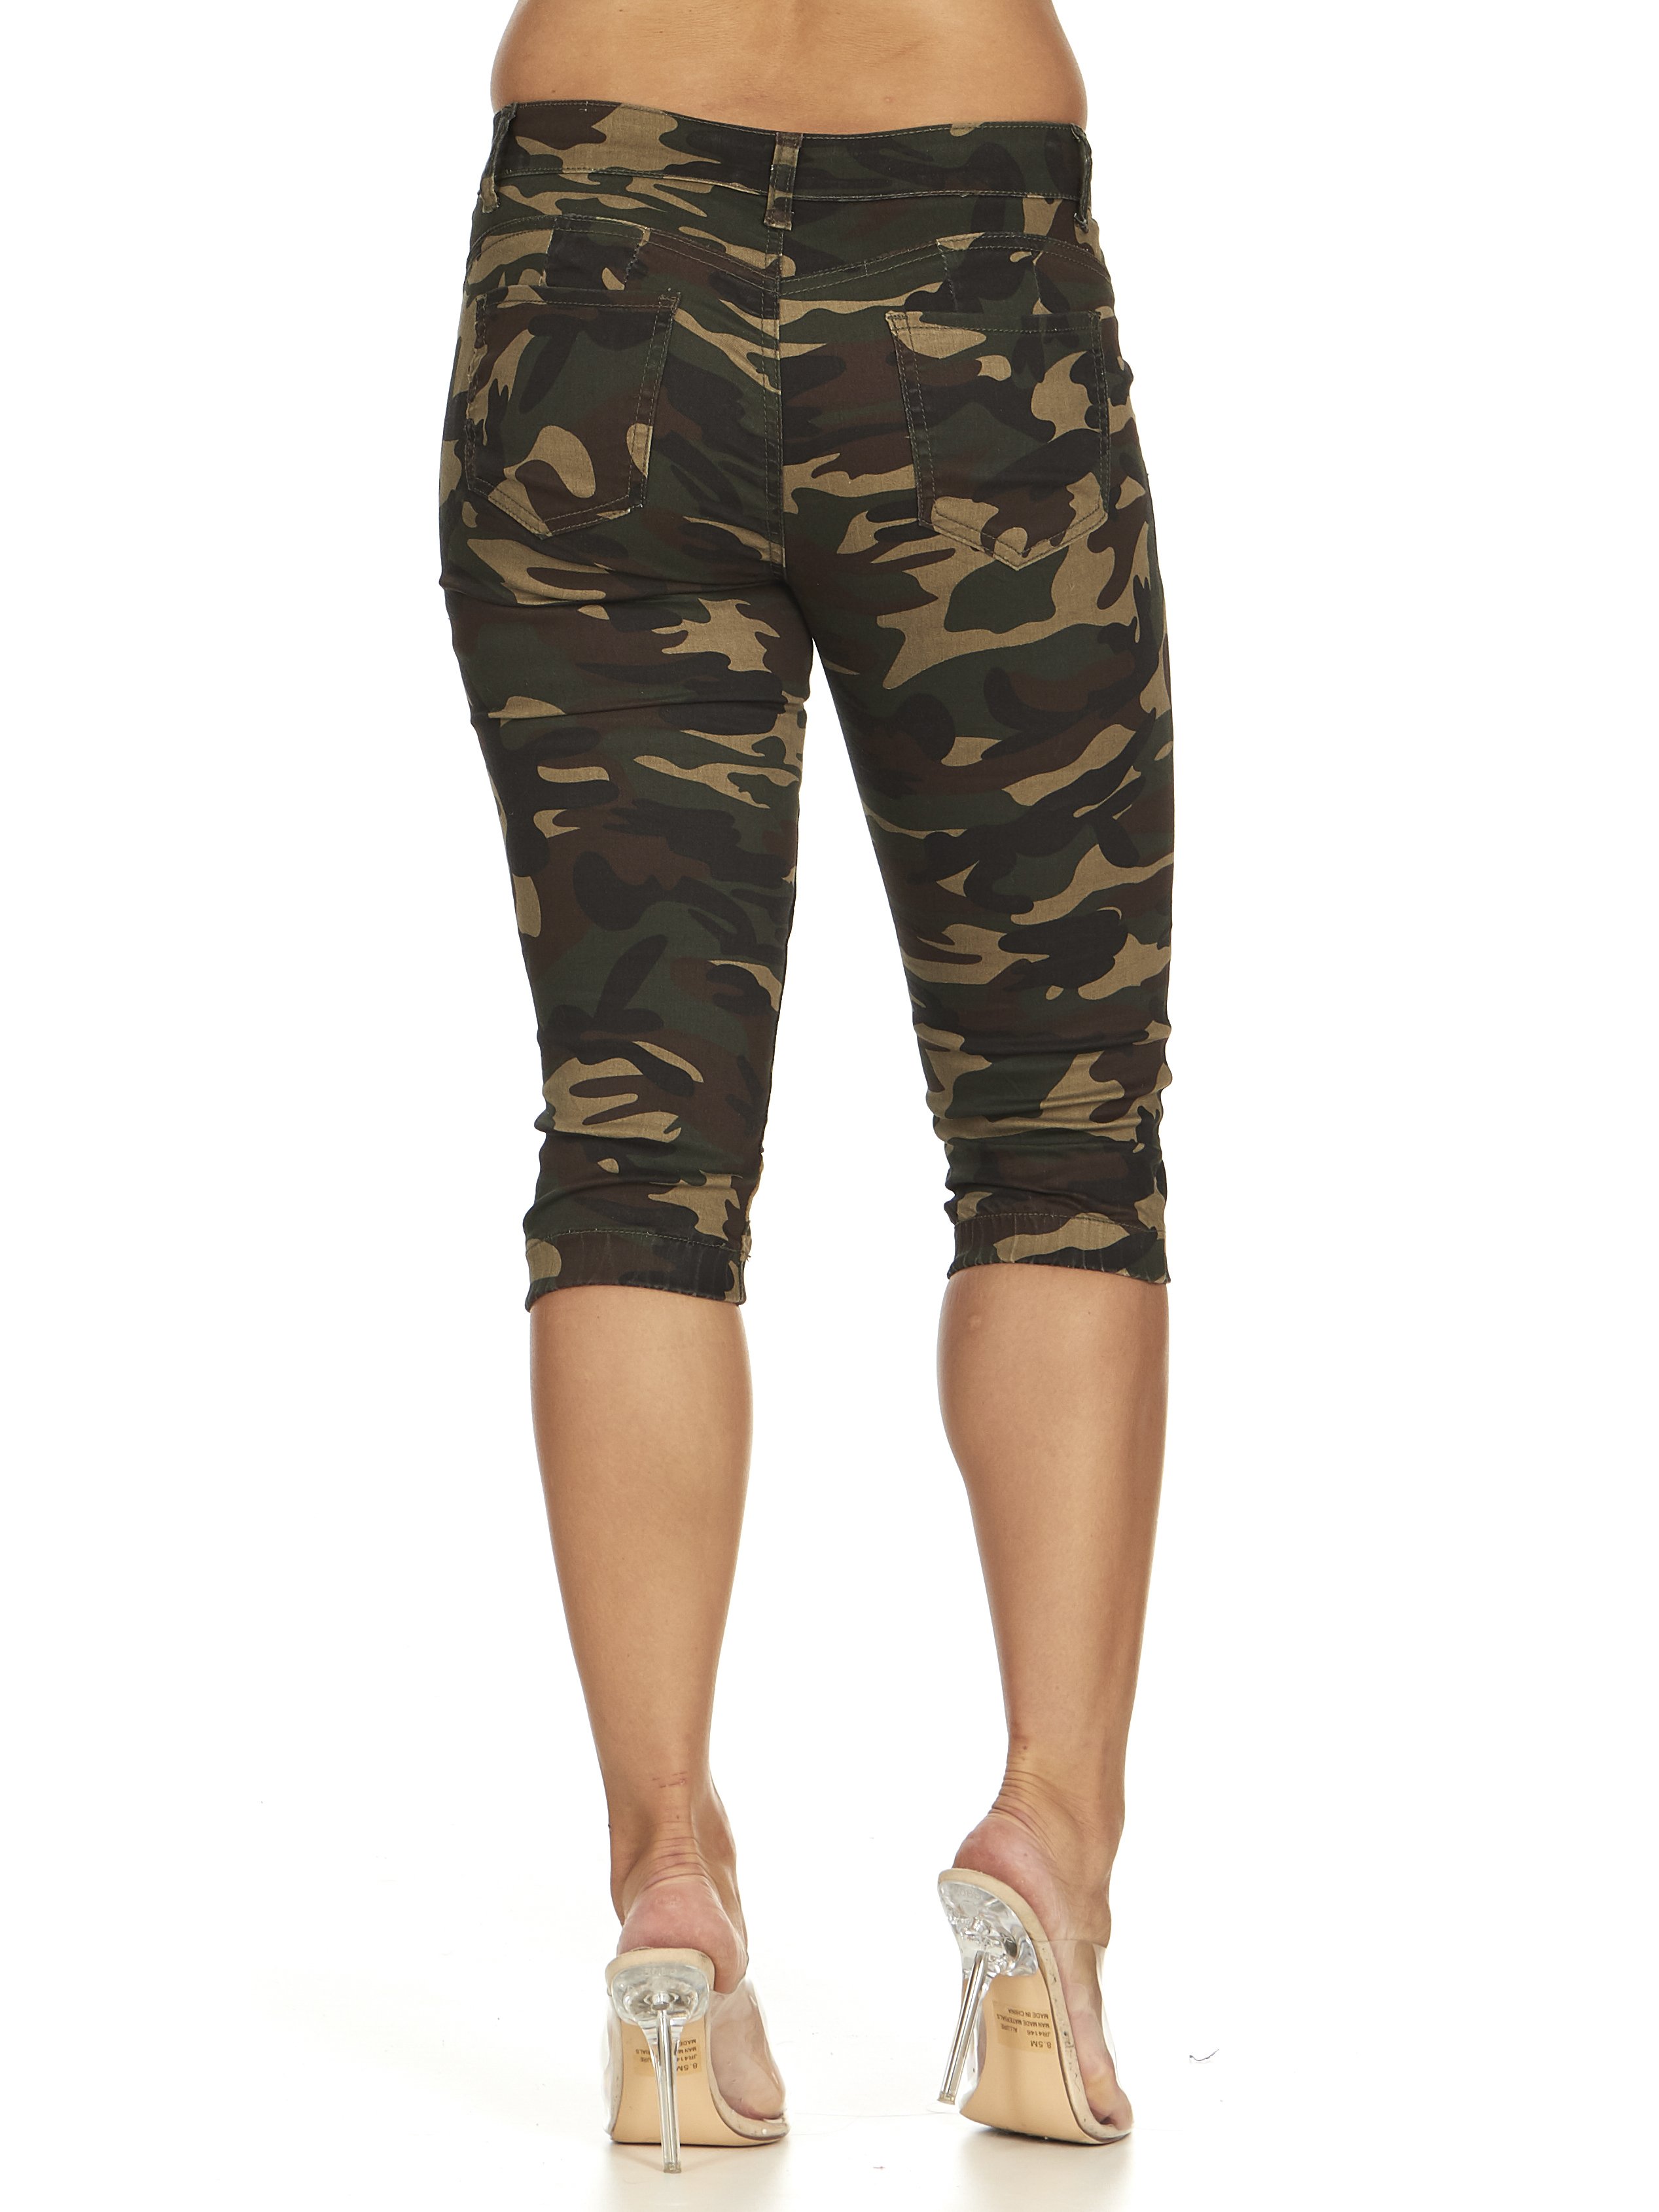 Cute Teen Girl Jeans Plus Size Capri Pants for Teen Girls in Camo Size 14W - image 3 of 7